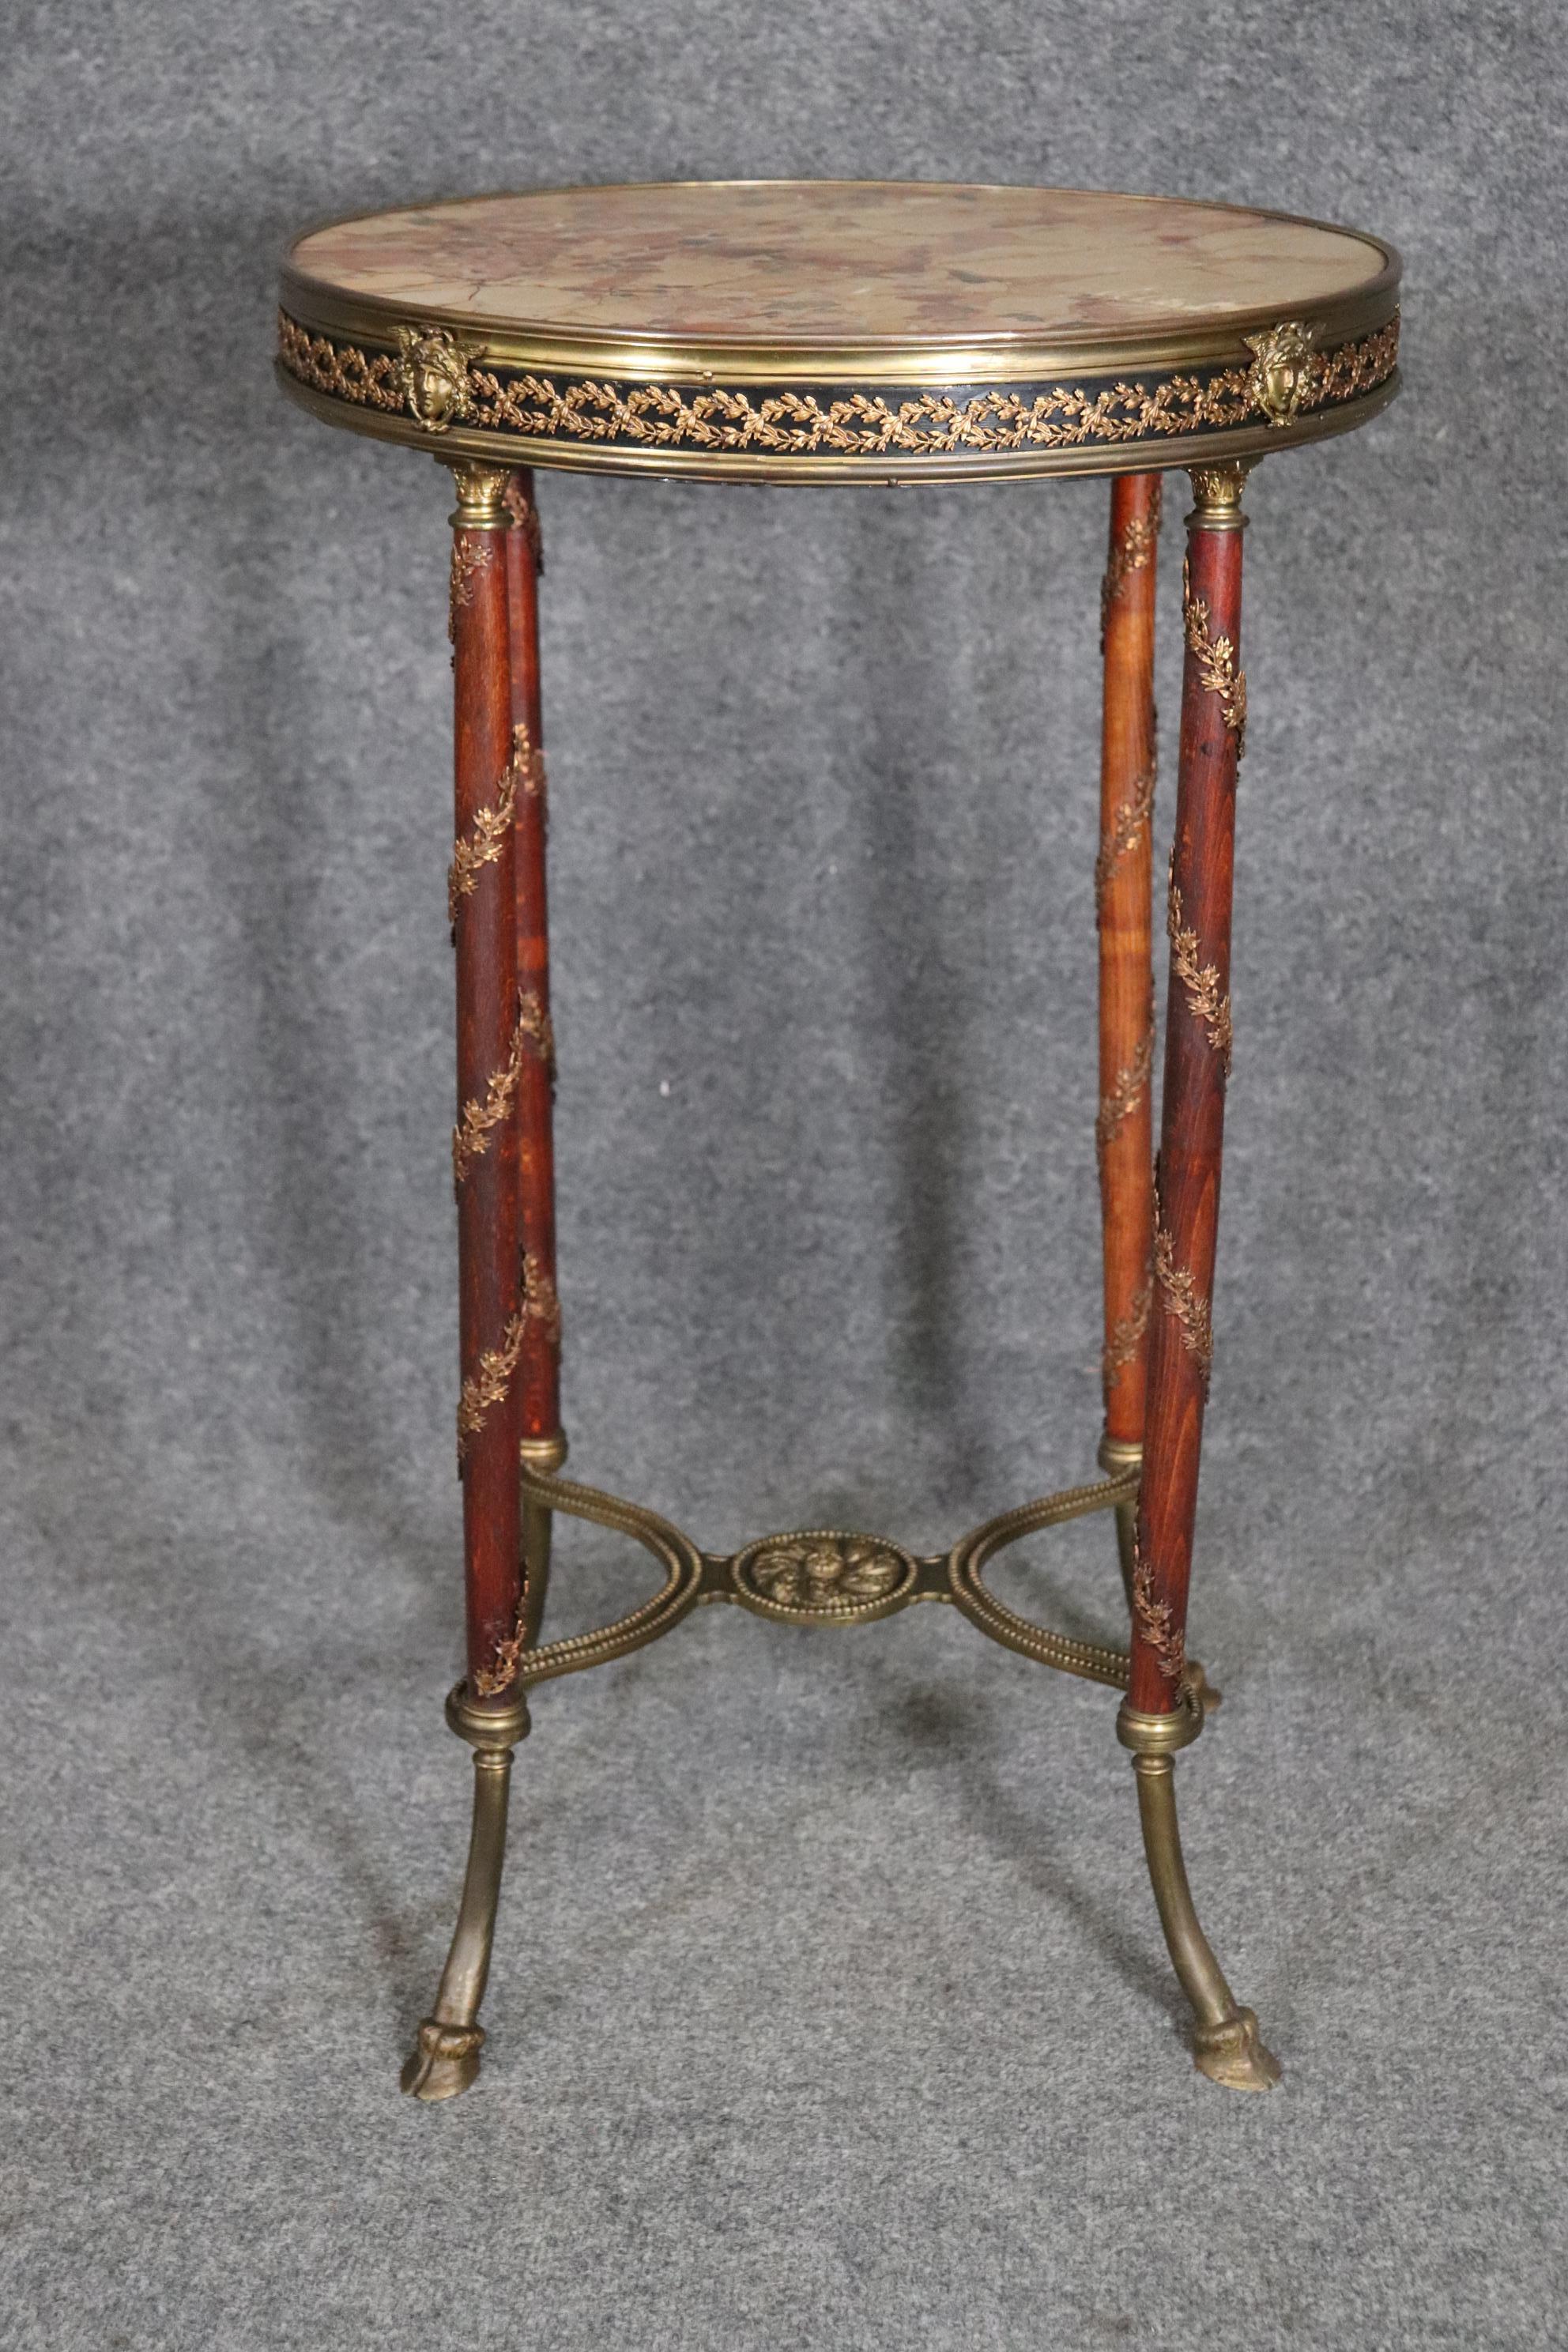 Fine Adam Weisweiler Style Bronze Mounted Breche d' Alep Marble Top Table For Sale 1